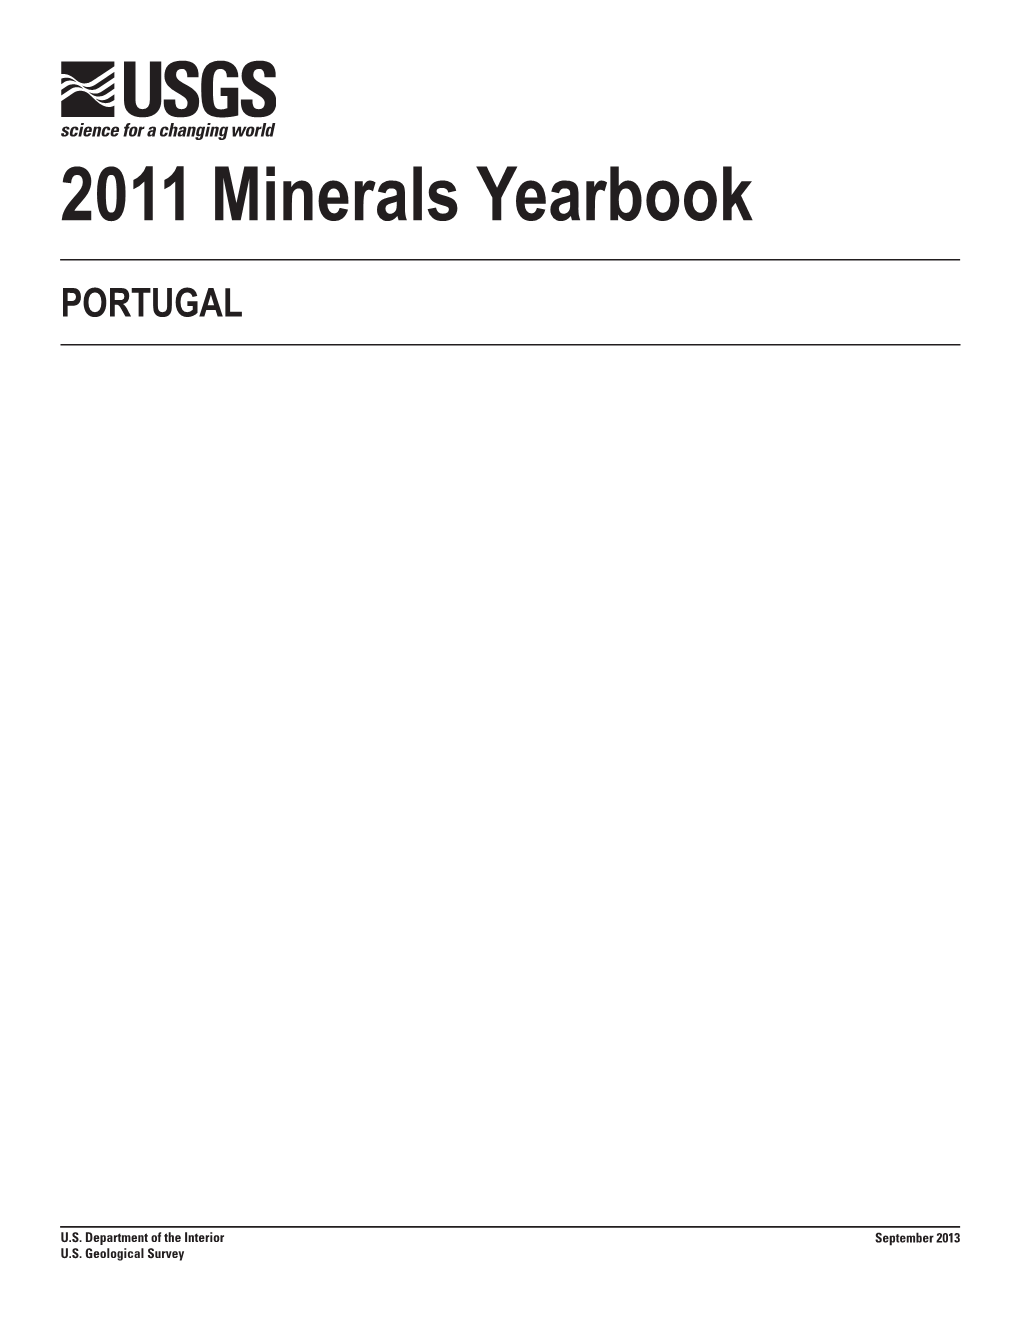 The Mineral Industry of Portugal in 2011